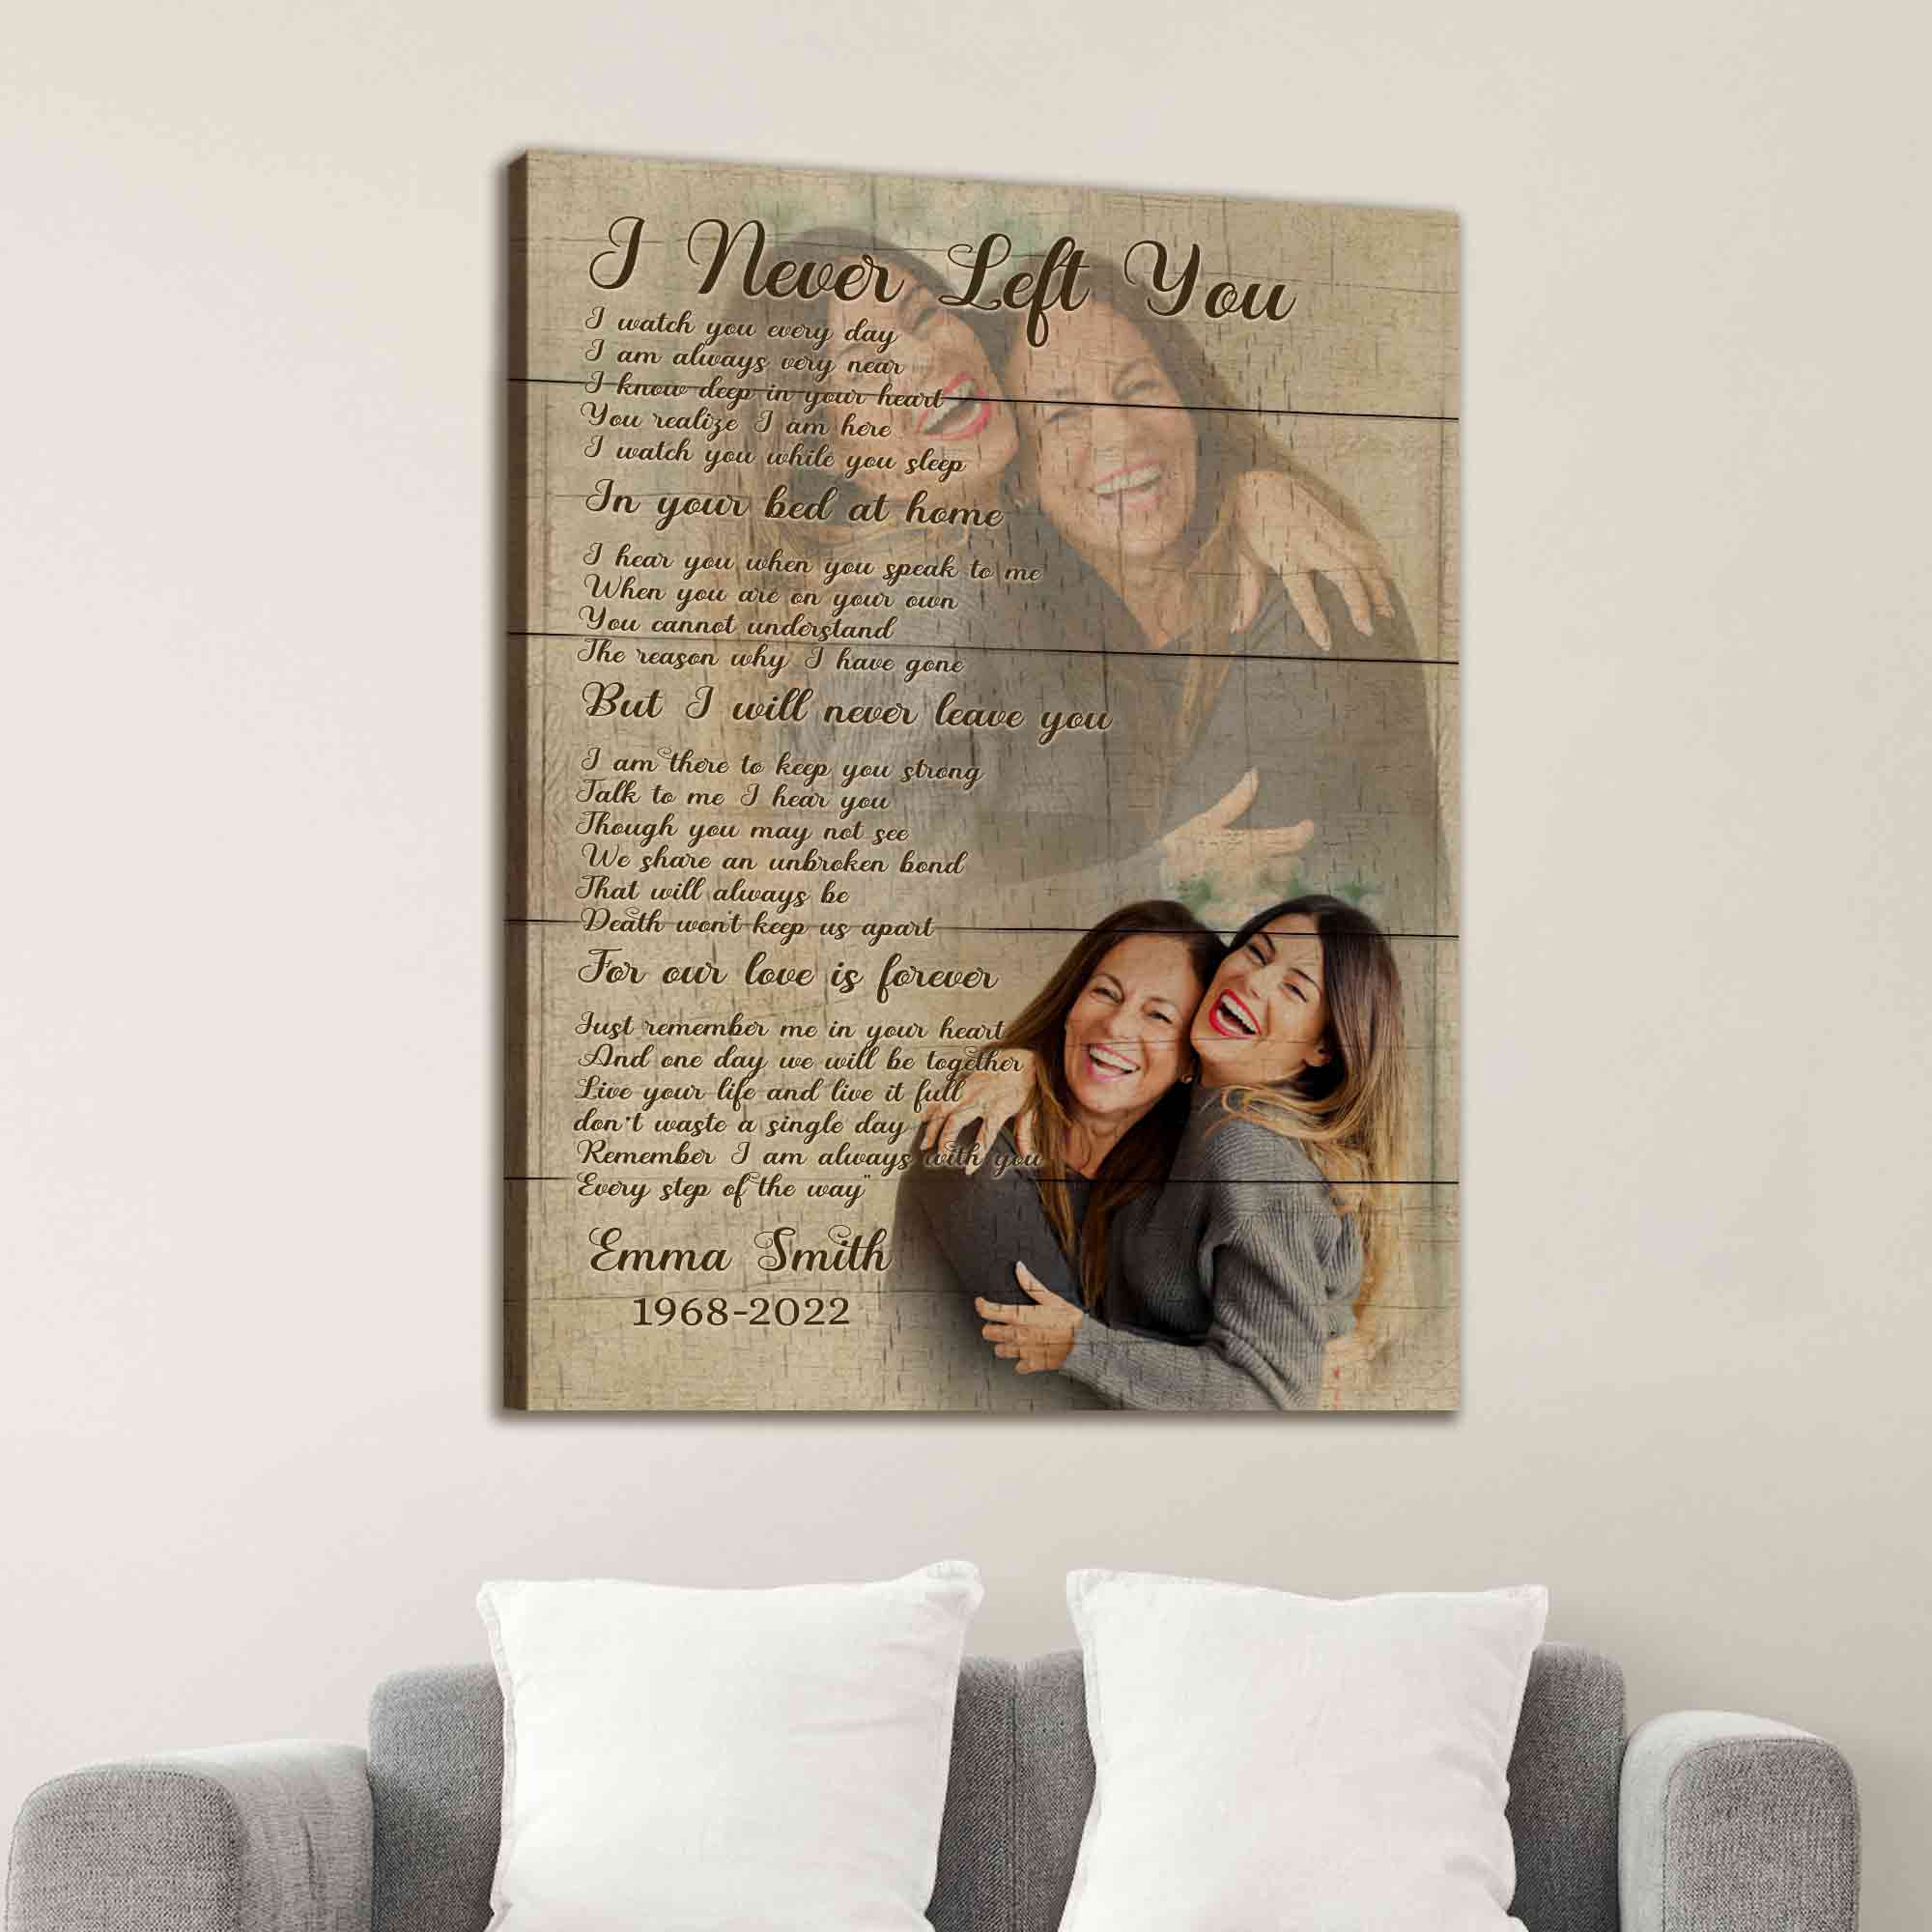 Best Sympathy Gifts for Loss of Mother, I Never Left You Memorial Canvas With Photo, Mom Remembrance Gifts